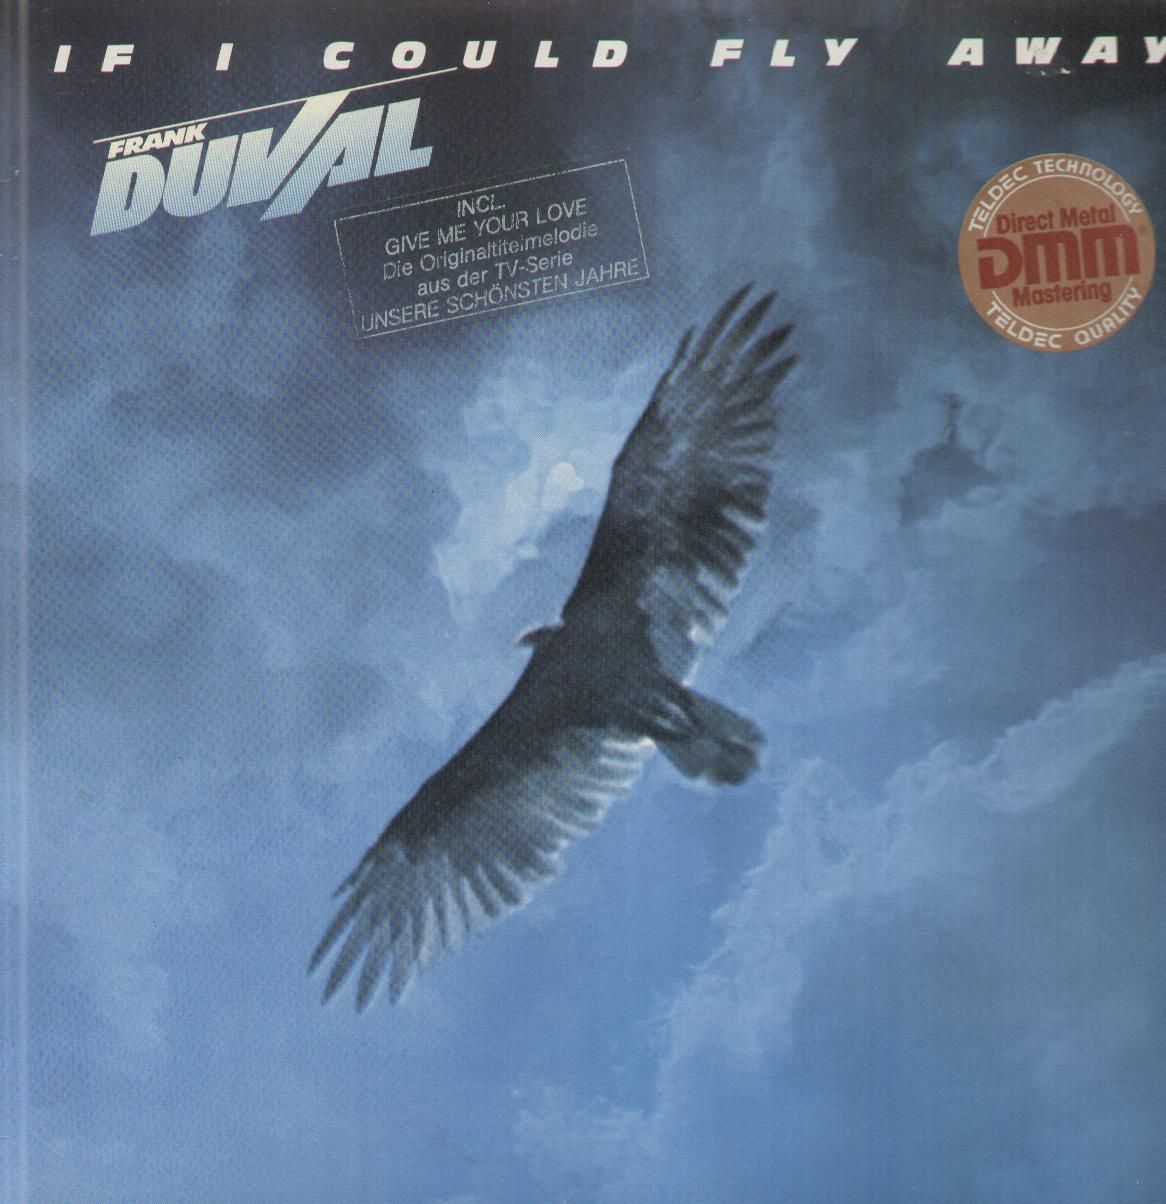  Frank Duval - If I Could Fly Away (1983)